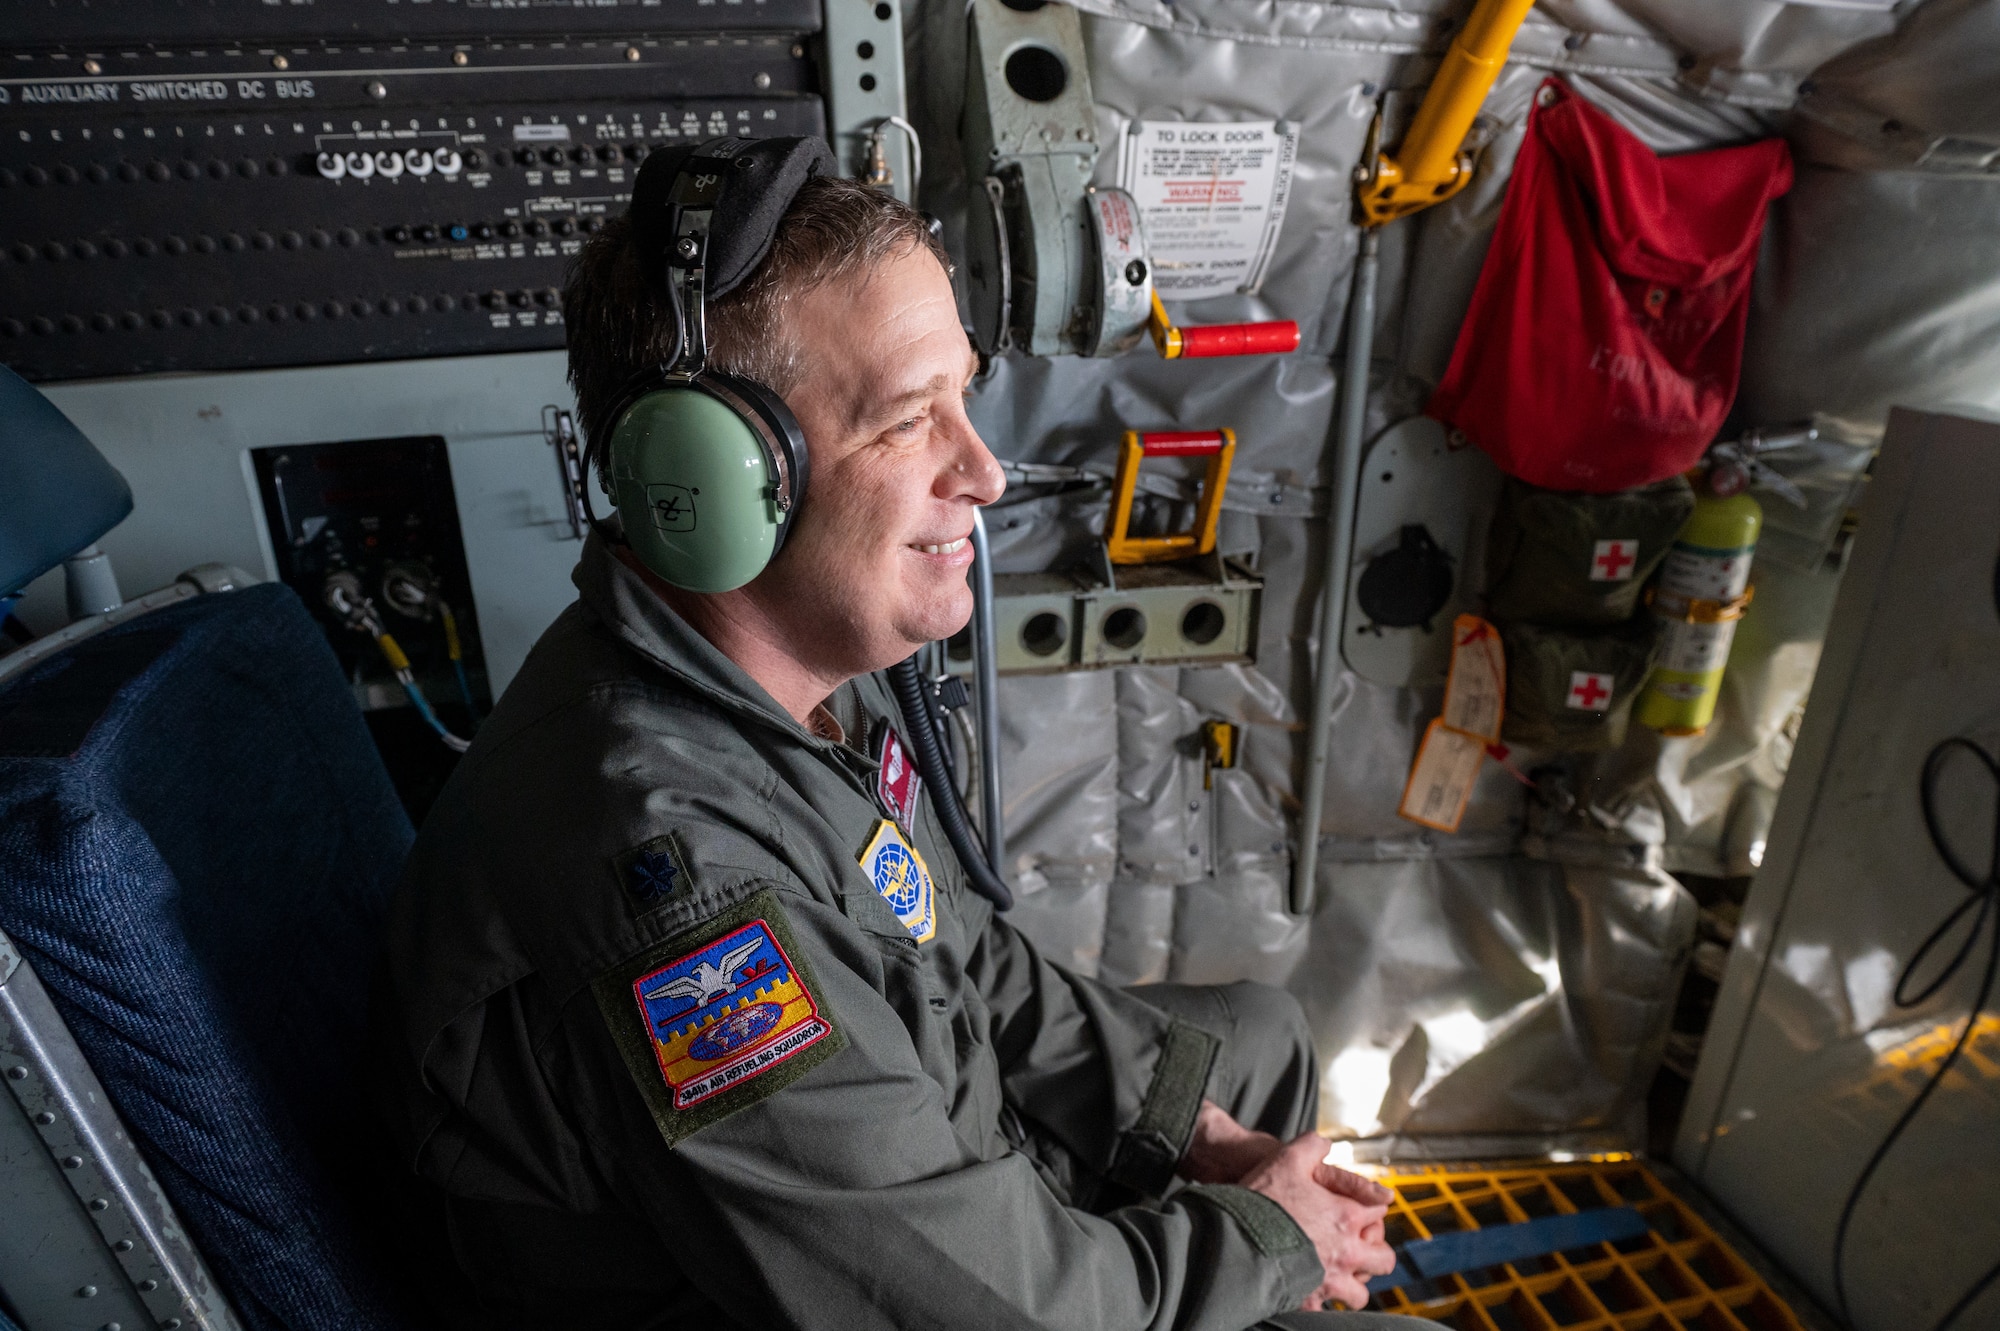 U.S. Air Force Lt. Col. Christian Cooper, 92nd Medical Group Chief of Aerospace Medicine, sits in the cockpit of a KC-135 Stratotanker during a Phase 3 Lead Wing exercise, June 6th, 2023. The 92nd Air Refueling Wing deployed personnel and KC-135 Stratotankers, to execute a Phase 3 Lead Wing exercise in preparation to be lead tanker wing at Air Mobility Command’s capstone exercise, Mobility Guardian 2023. A safety and flight medicine observer were each on board to evaluate fatigue levels and ensure the safety of the crew.